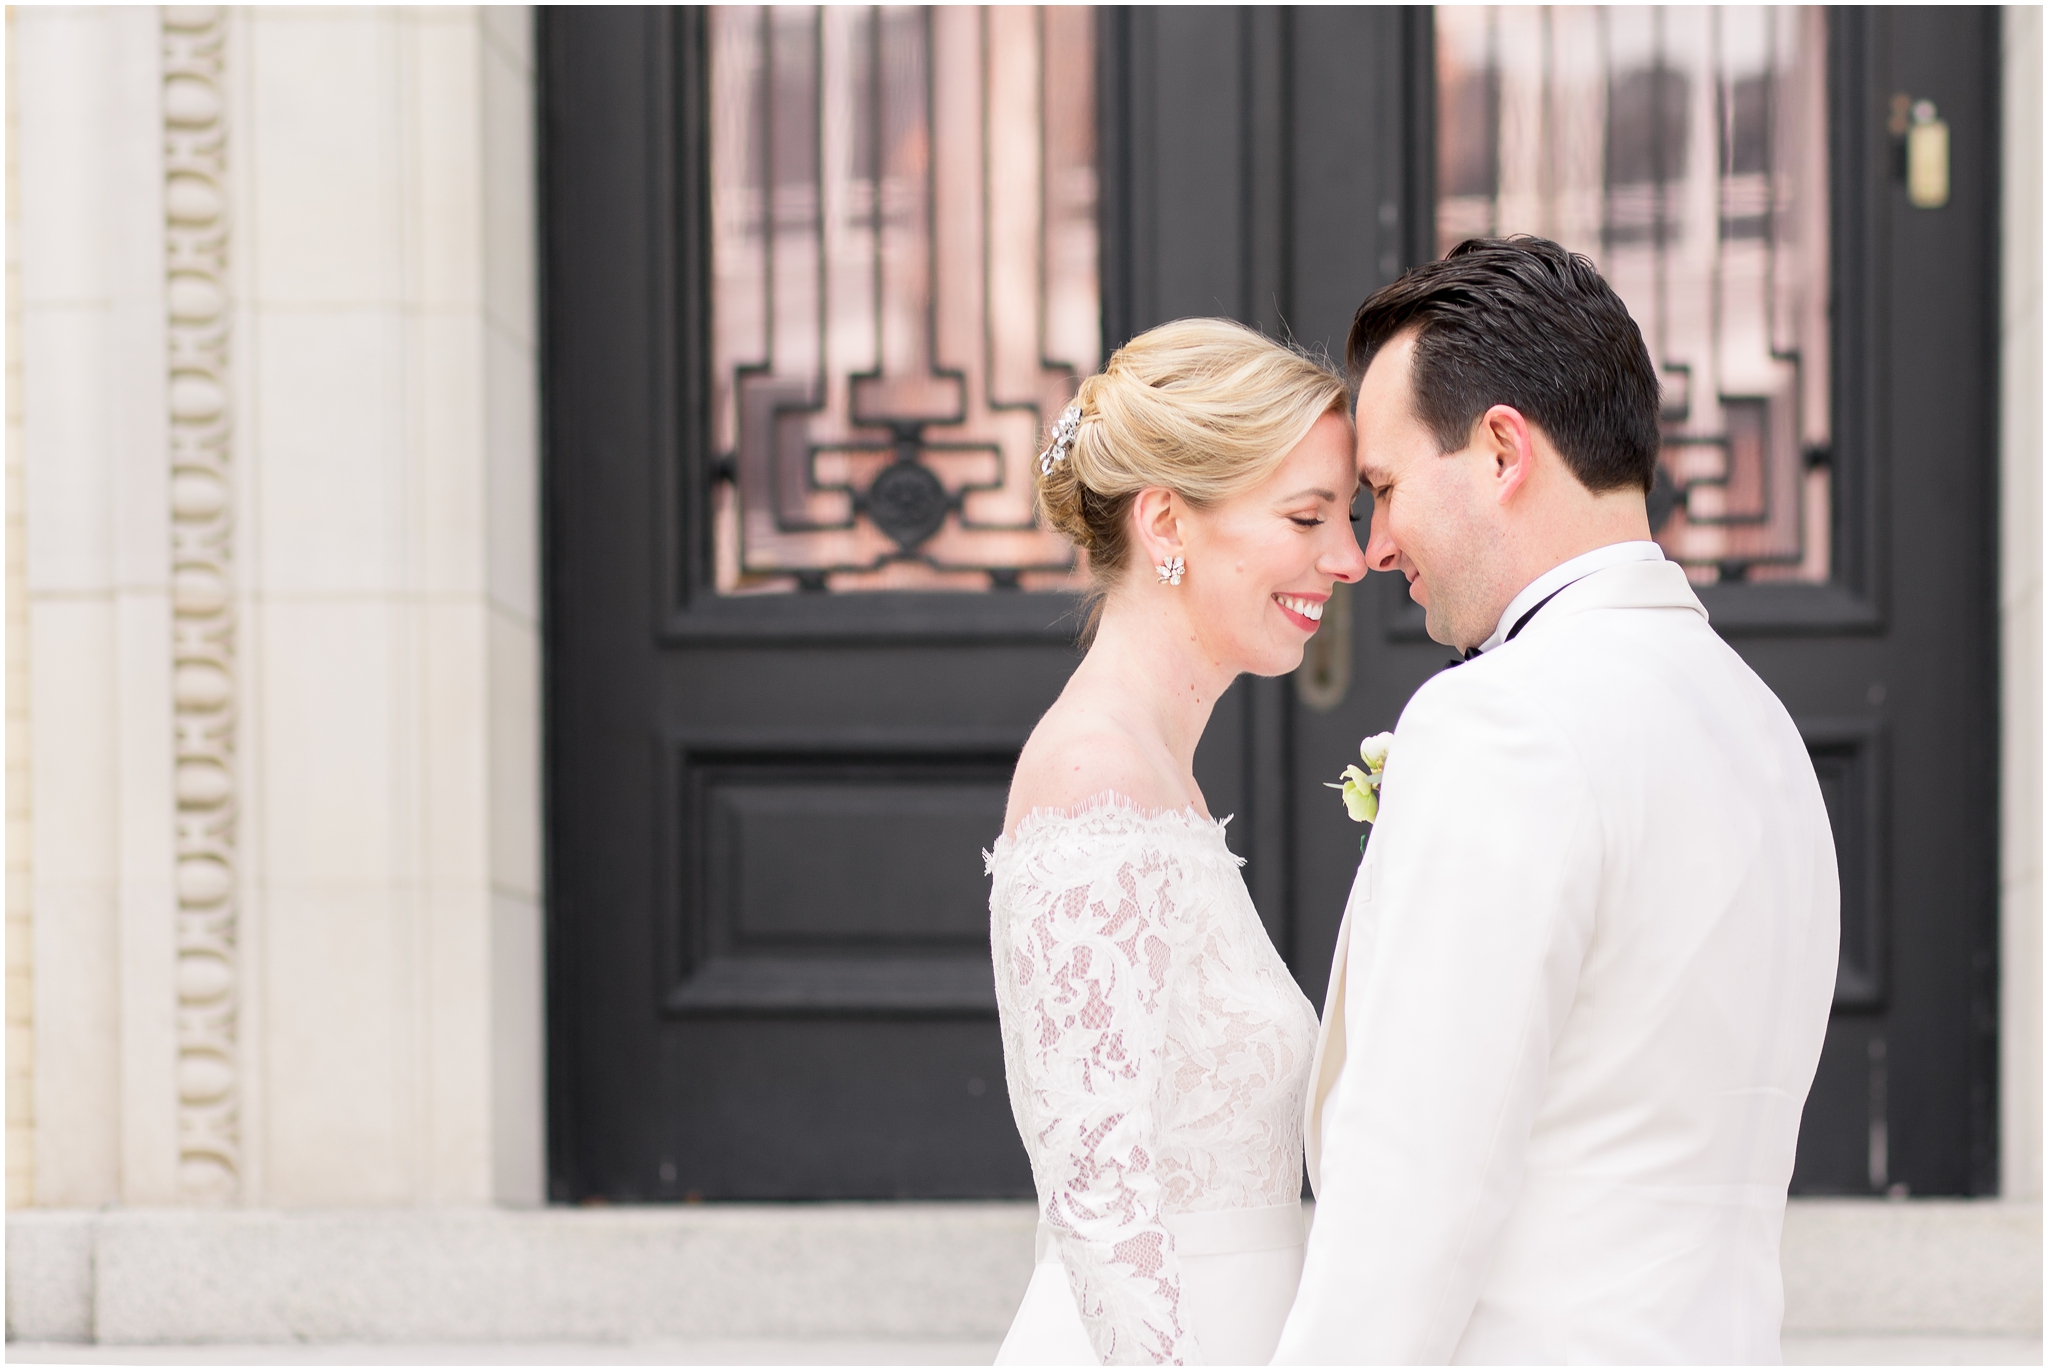 Jefferson Hotel wedding captured in Washington DC by DC wedding photographer Taylor Rose Photography. Black Tie wedding in Washington DC. Groom wore a white suit. First Look